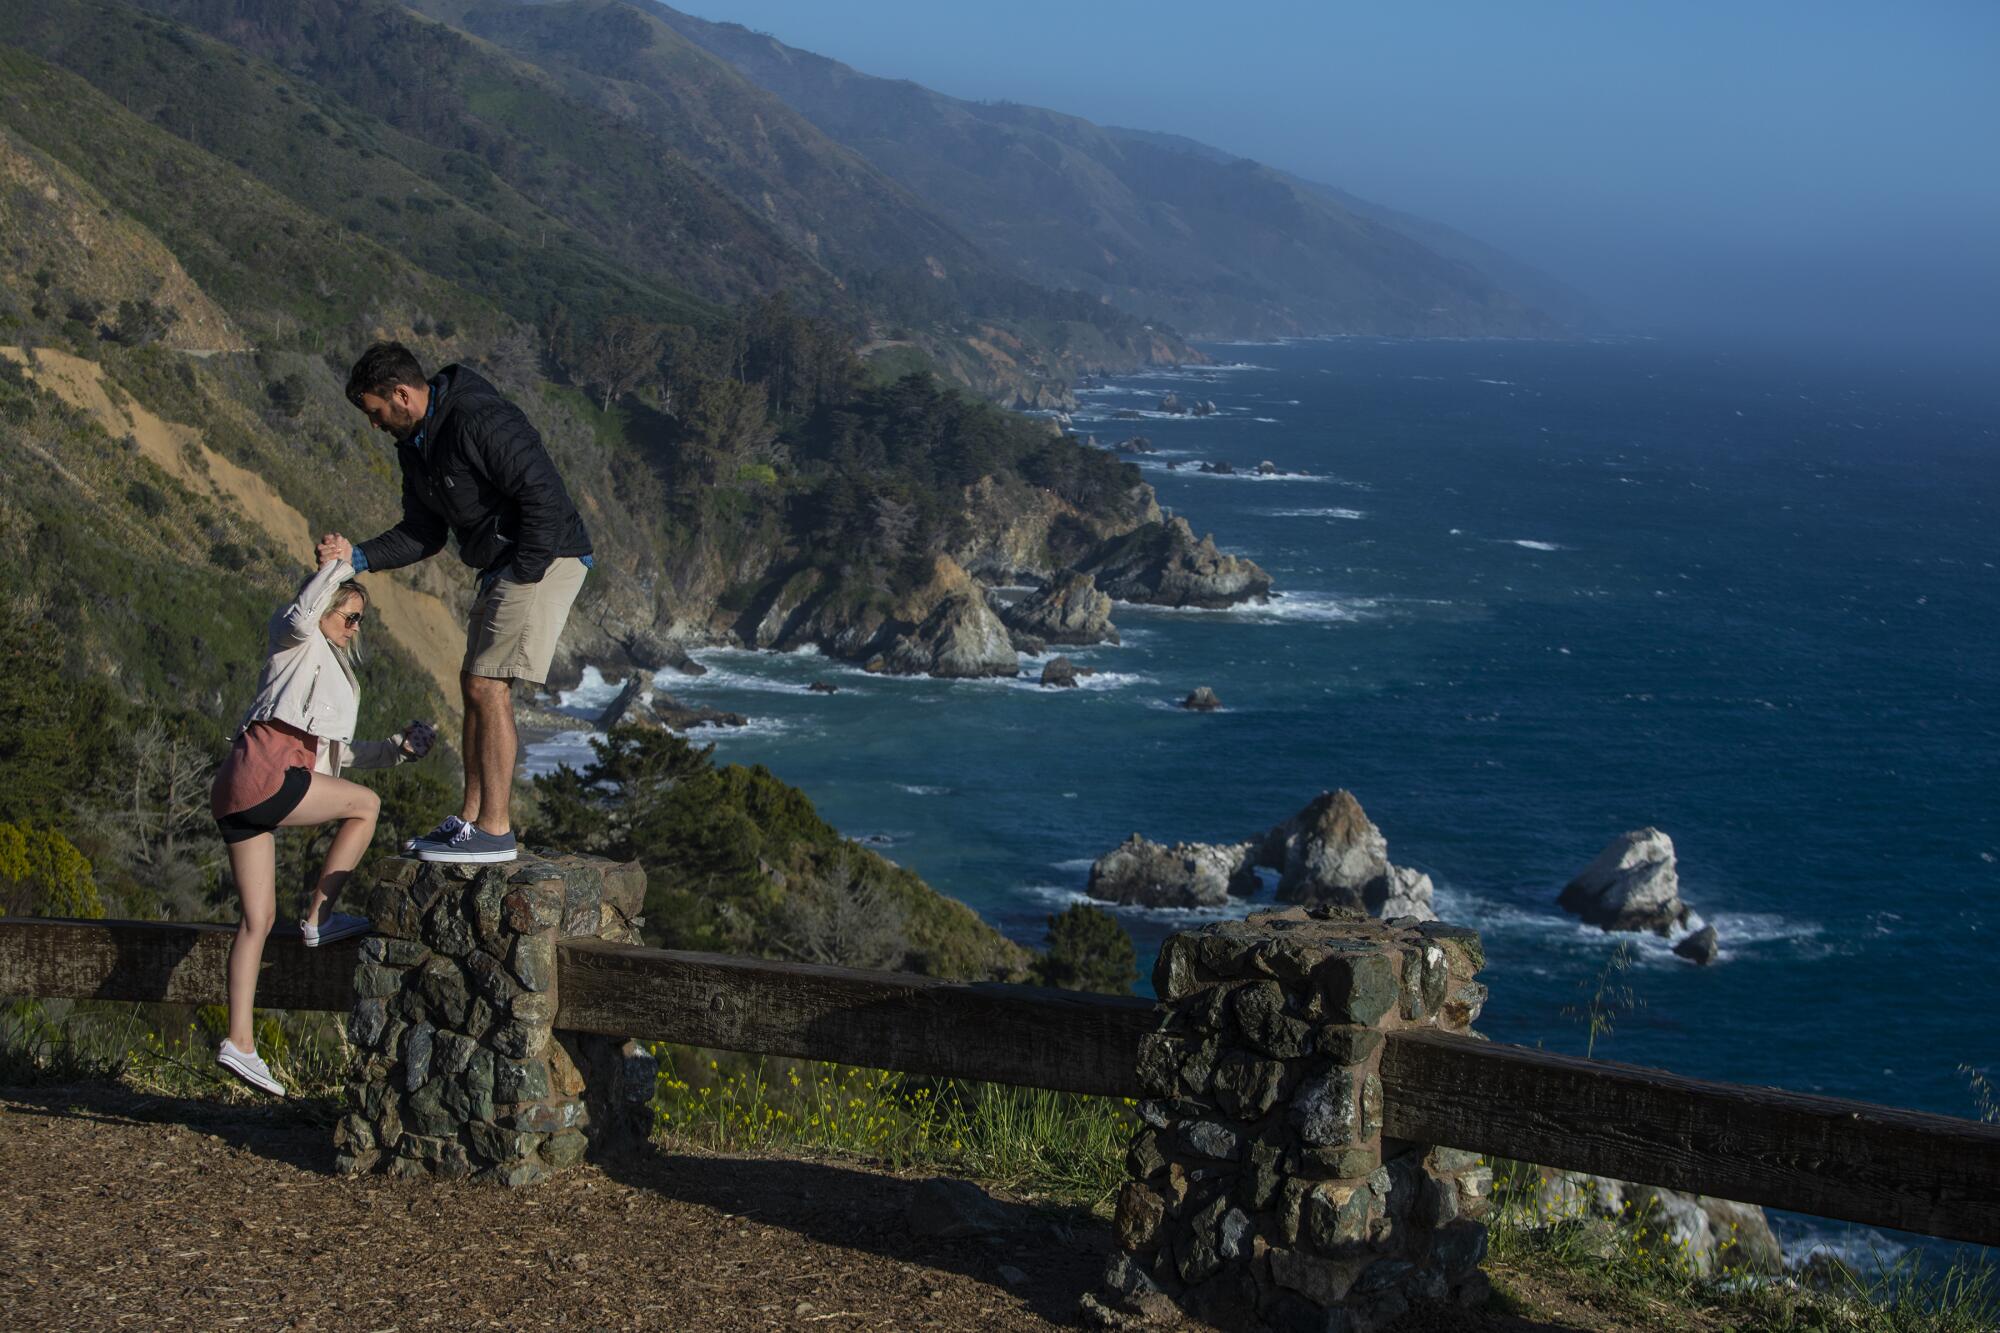 A man helps a woman climb atop a low fence at a viewing spot, with ocean and rugged coast in the background.